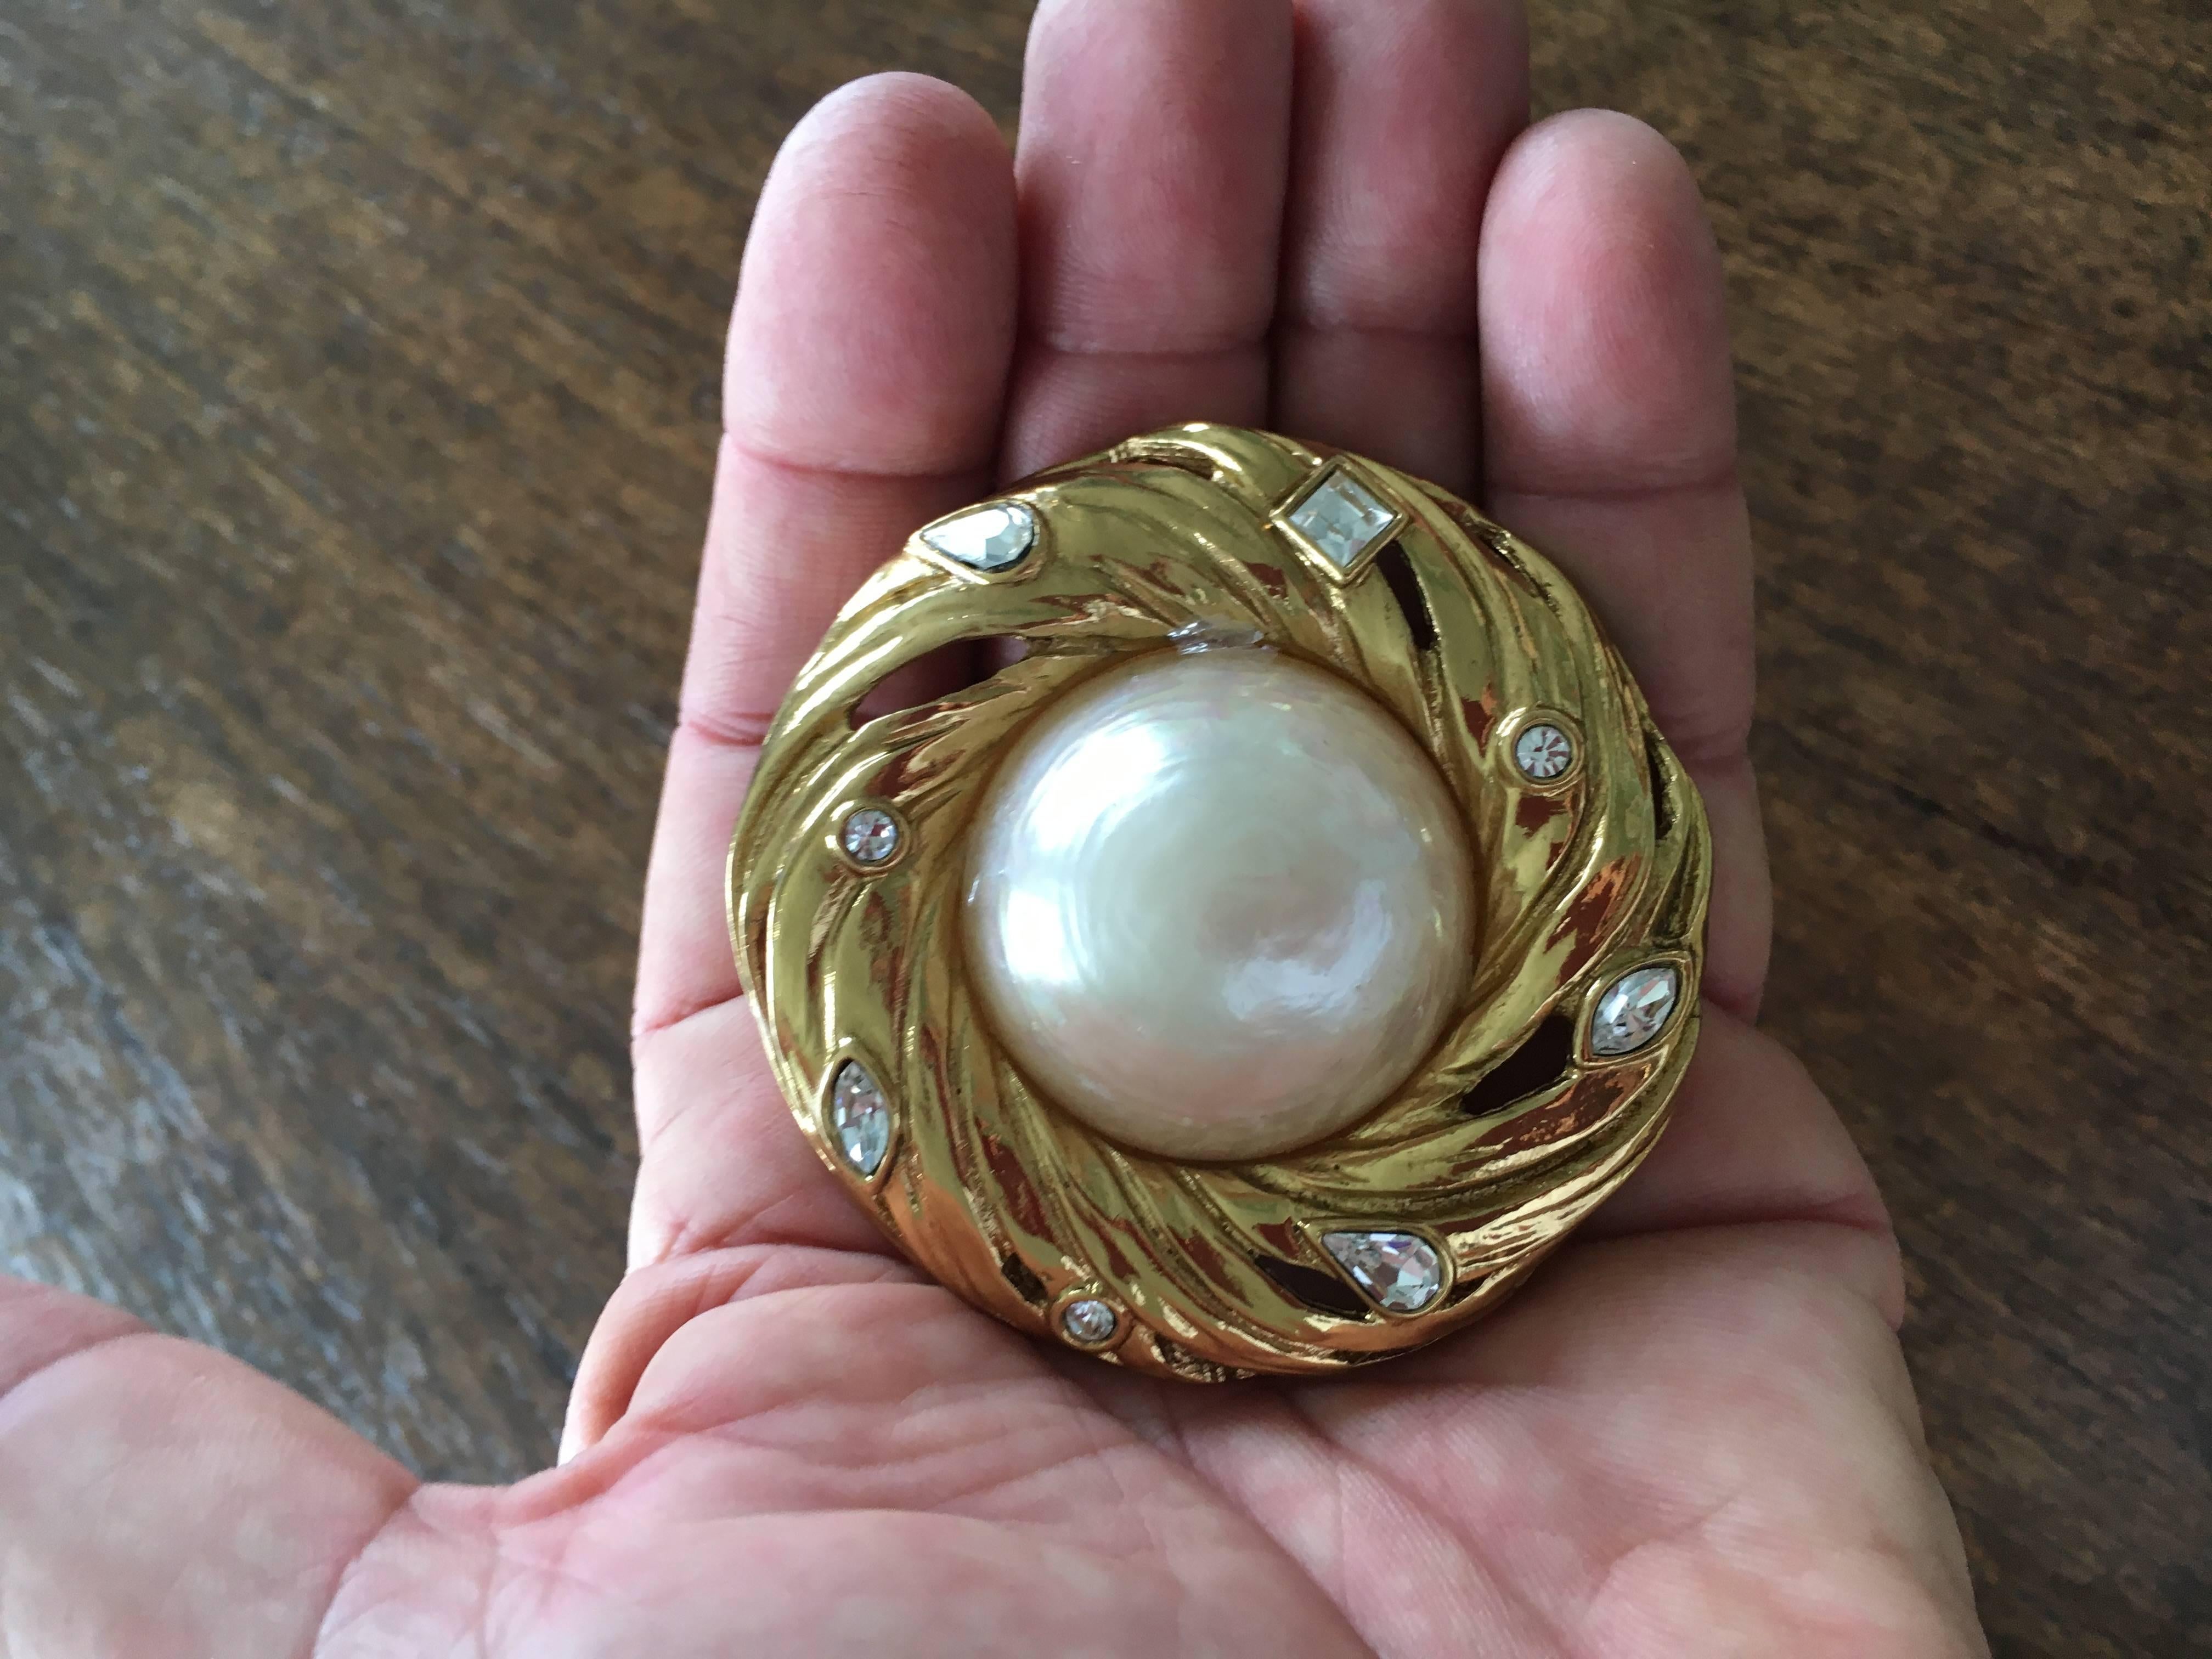 Yves Saint Laurent Vintage Large Pearl and Crystal Brooch.
There is a hook on the back to hang as a pendant.
3